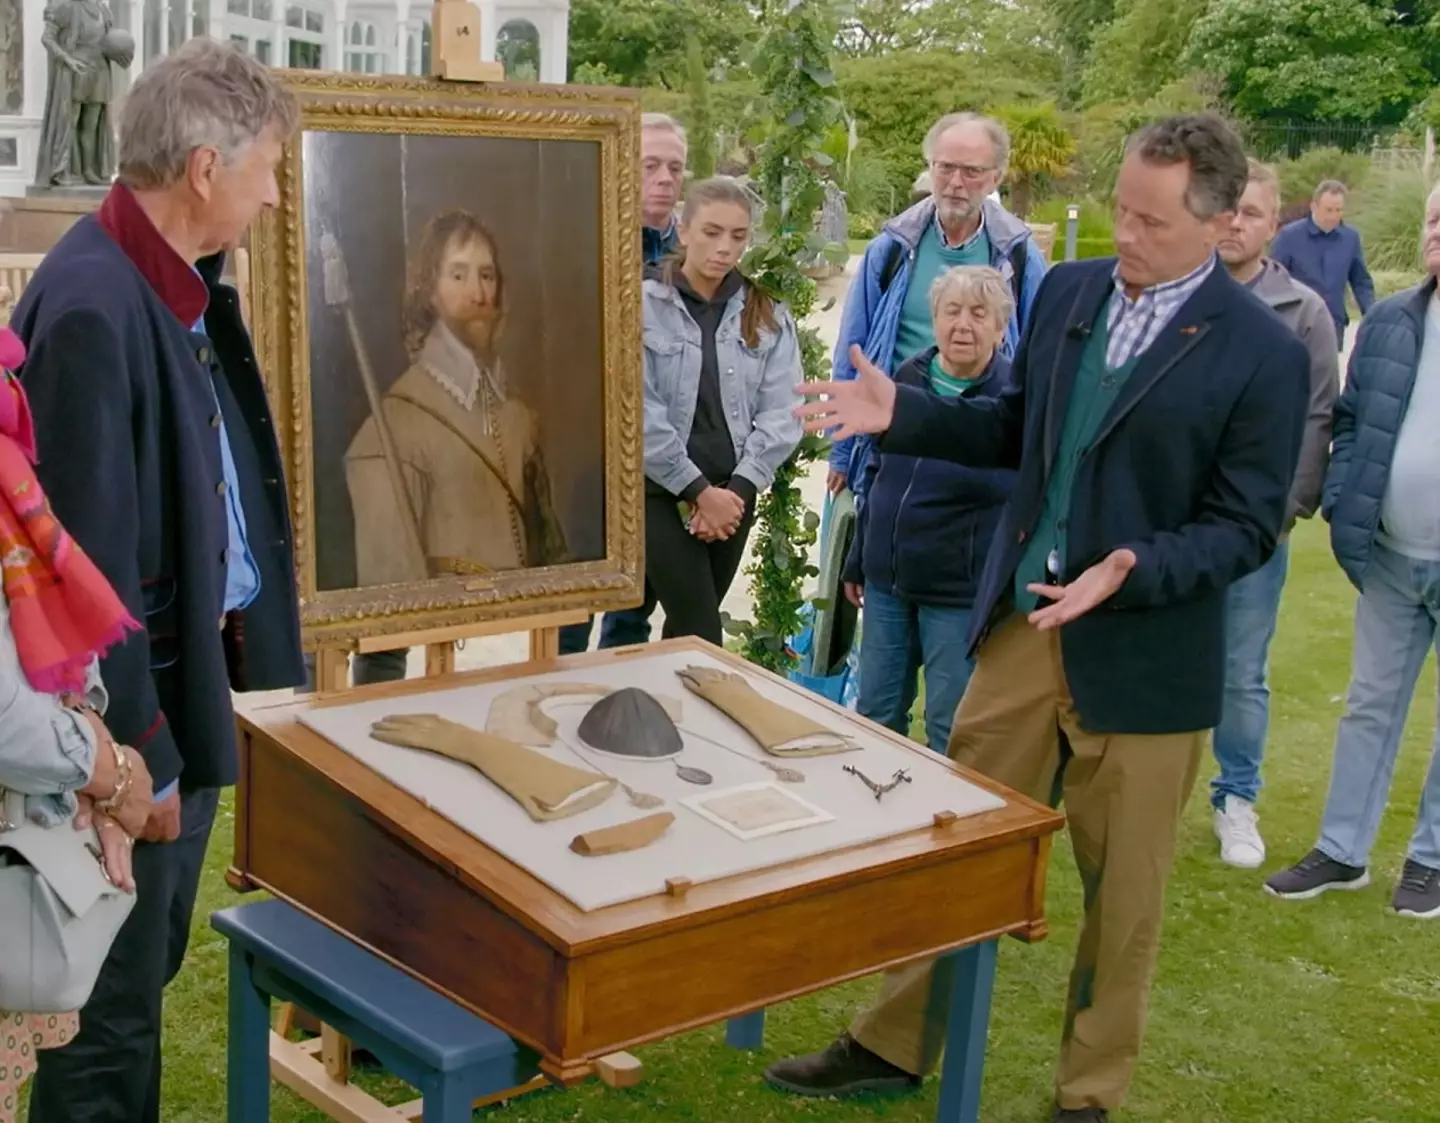 An impressive Antiques Roadshow haul, but ultimately not for sale. (BBC)